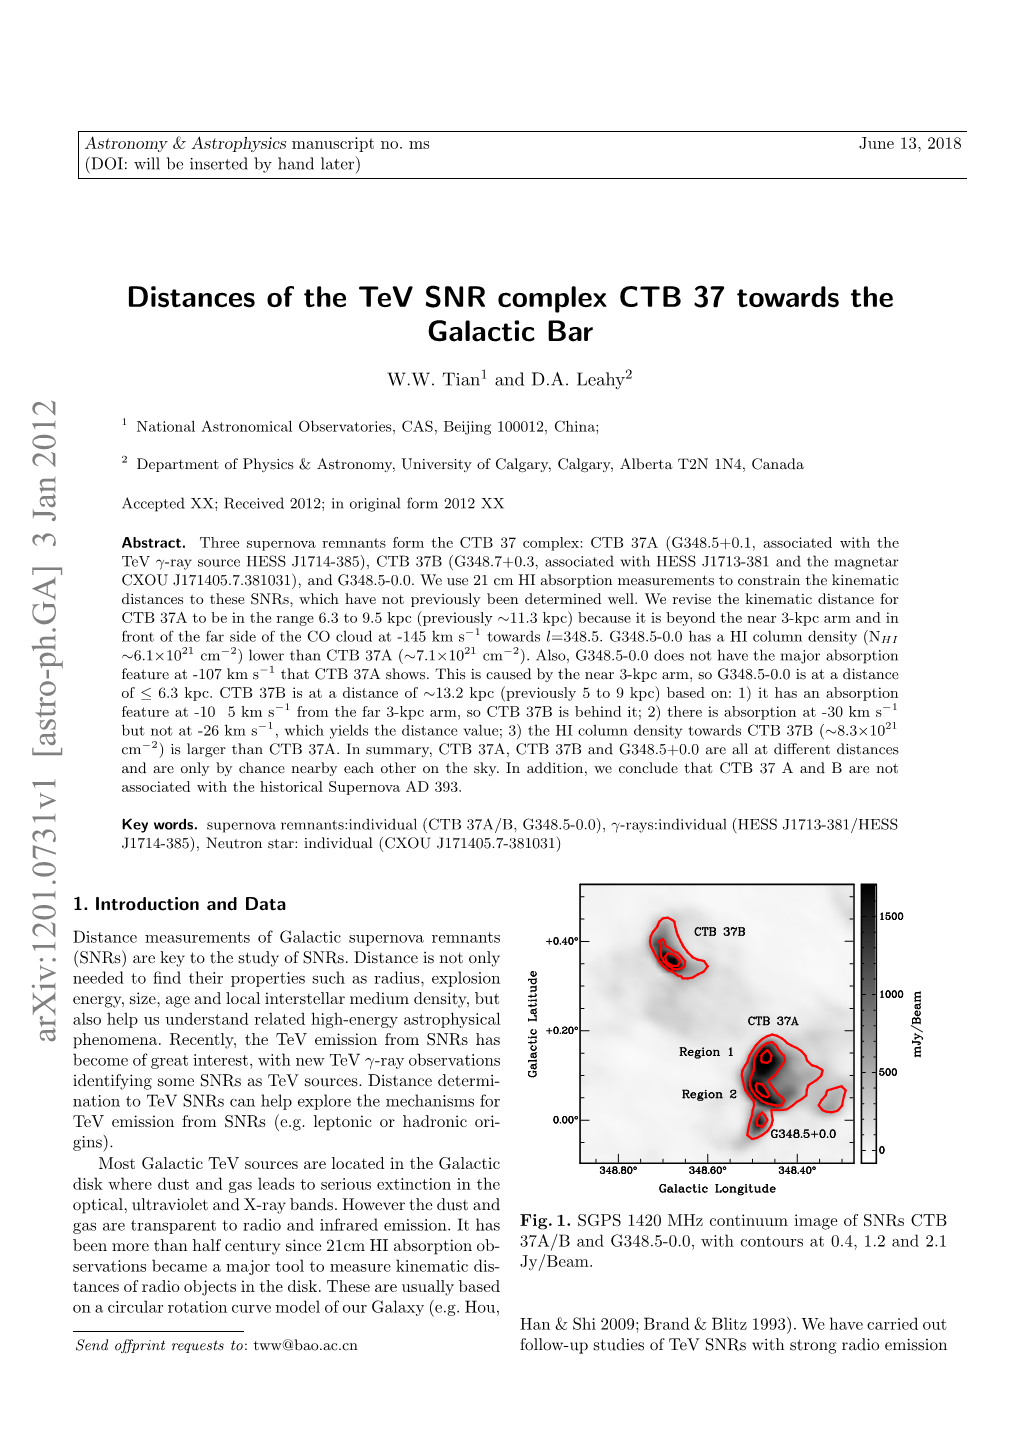 Distances of the Tev SNR Complex CTB 37 Towards the Galactic